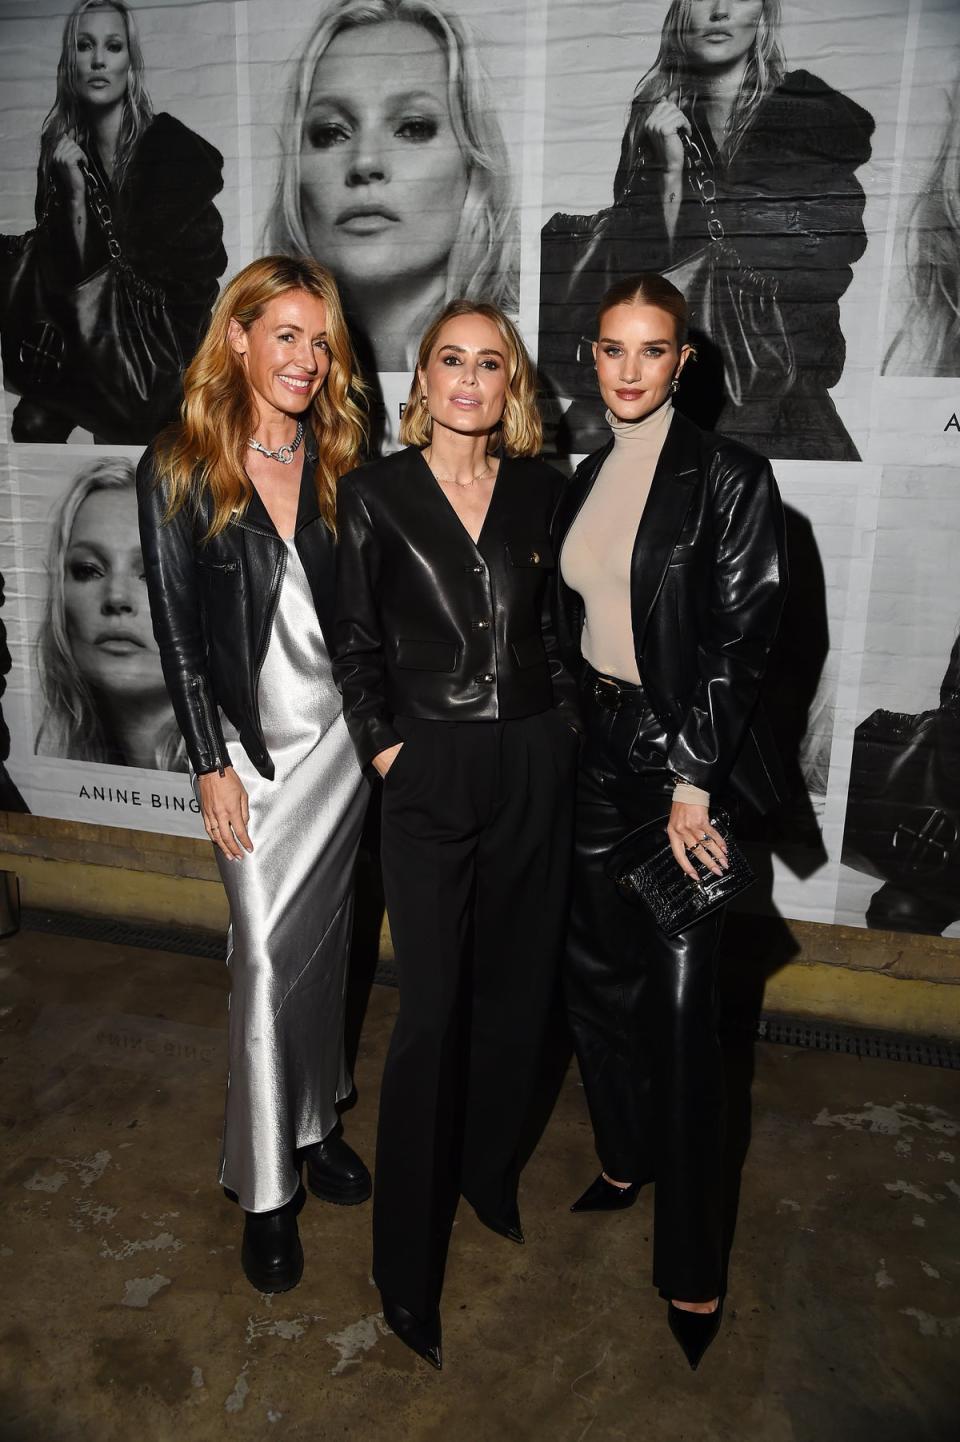 (L-R) Cat Deeley, Anine Bing and Rosie Huntington-Whiteley pictured at the event (Getty Images)